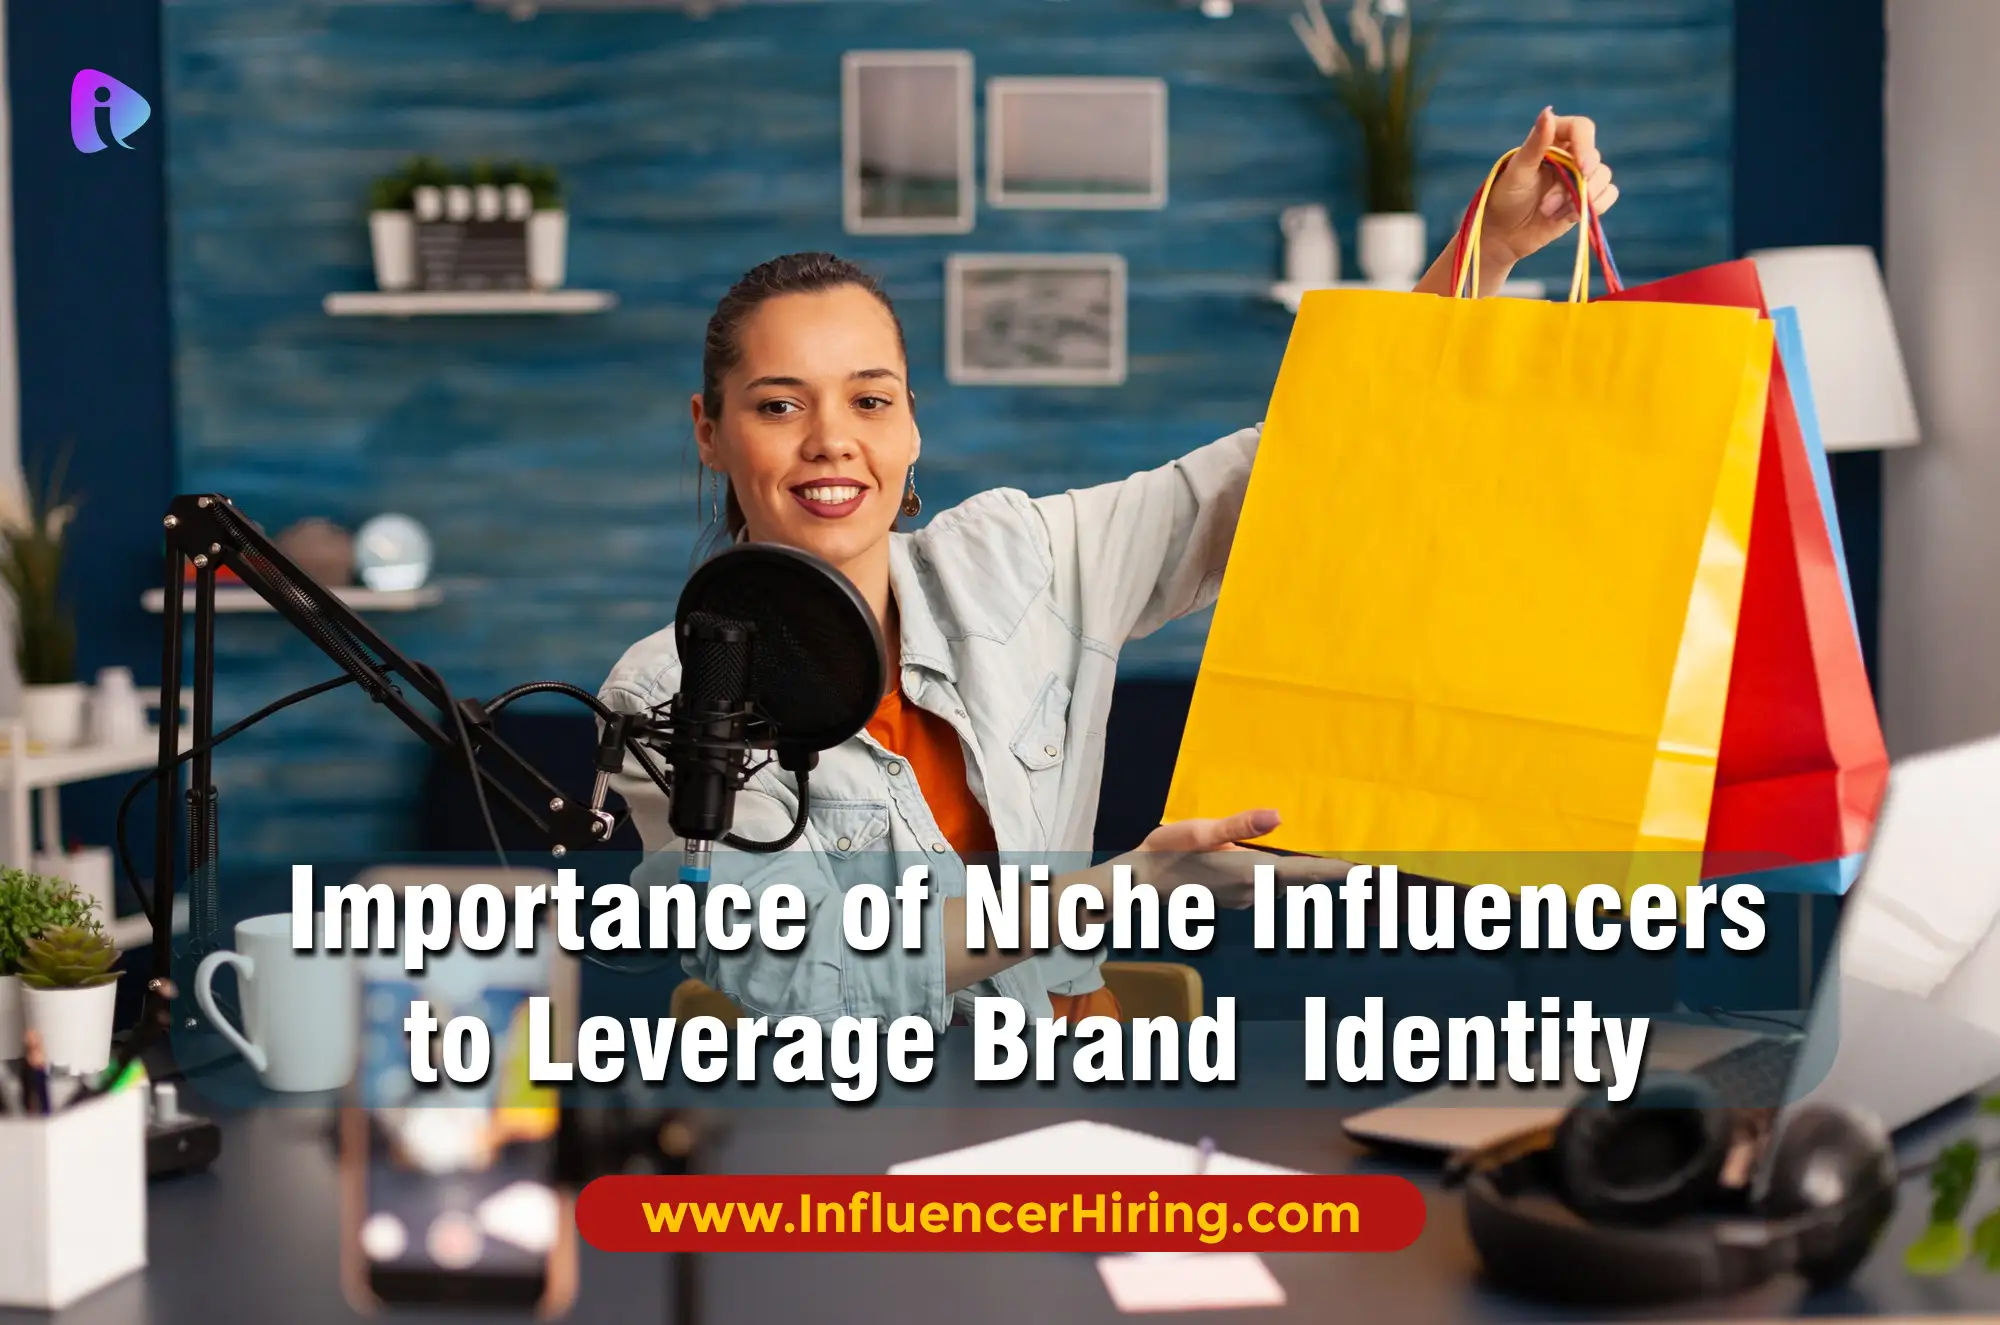 influencer marketplace, where brands and specialized influencers engage in strategic collaborations